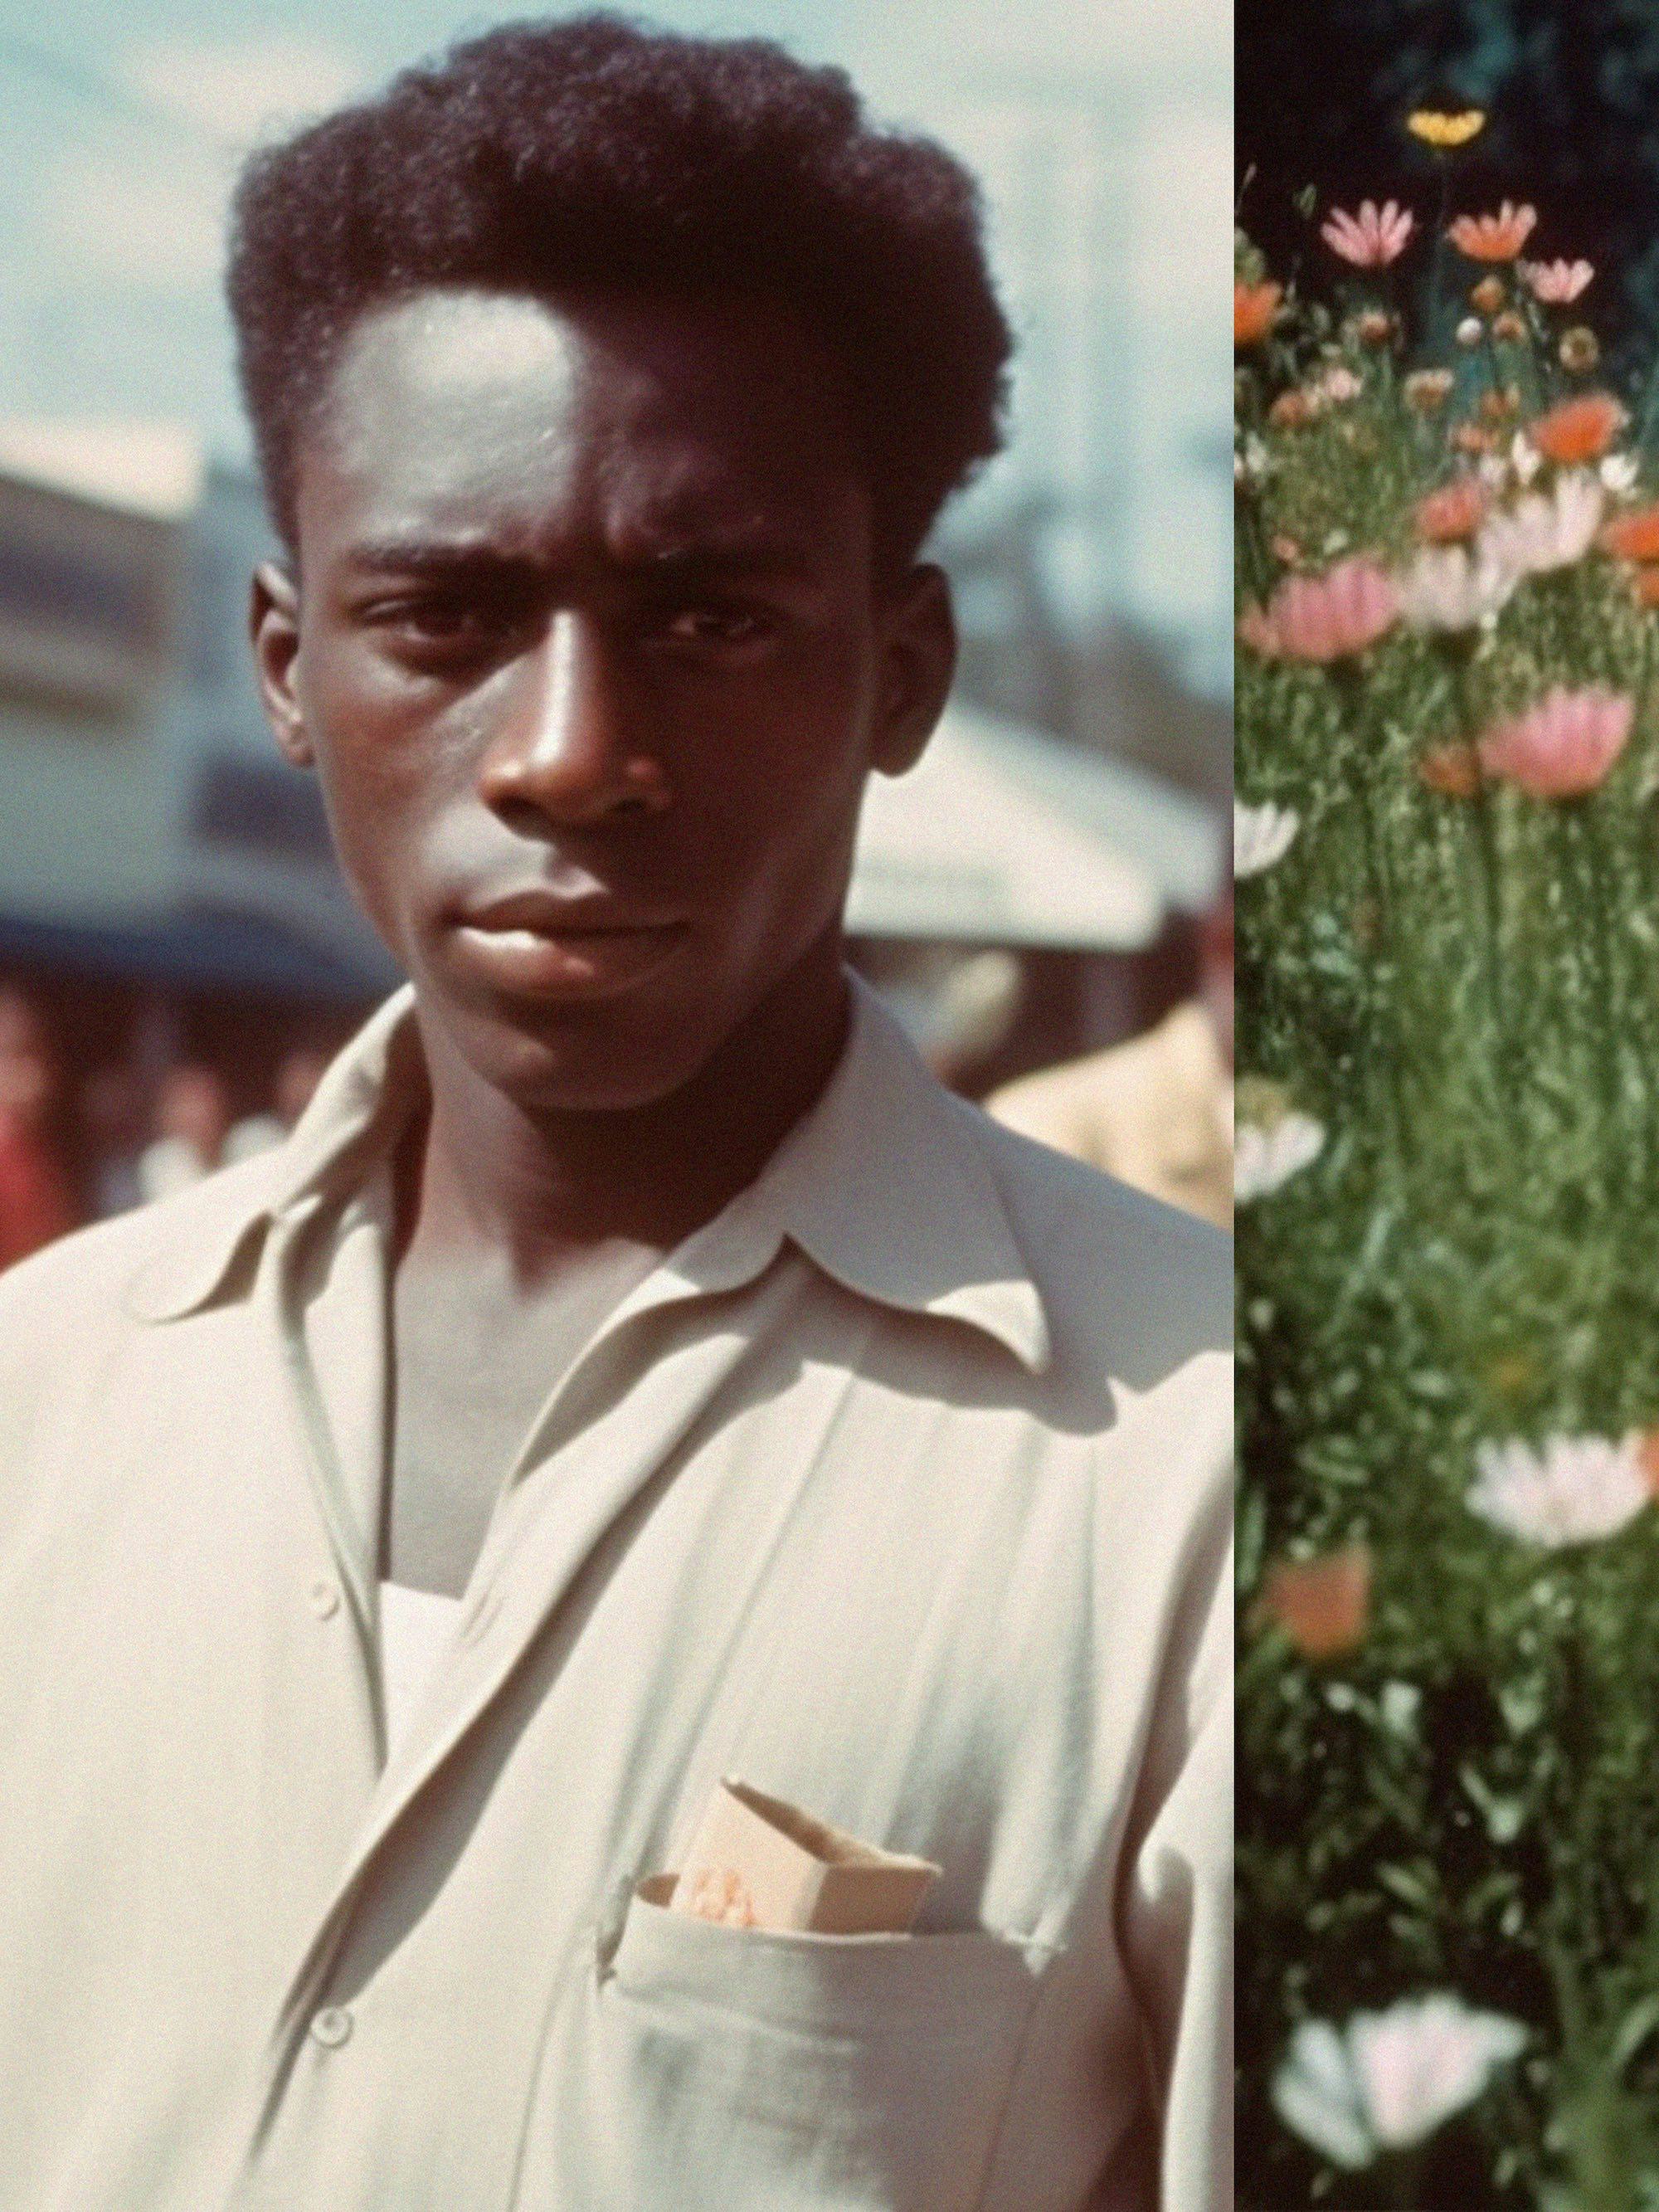 A.I. generated collaged image showing a portrait of a Black man and a field of flowers© Sander Coers